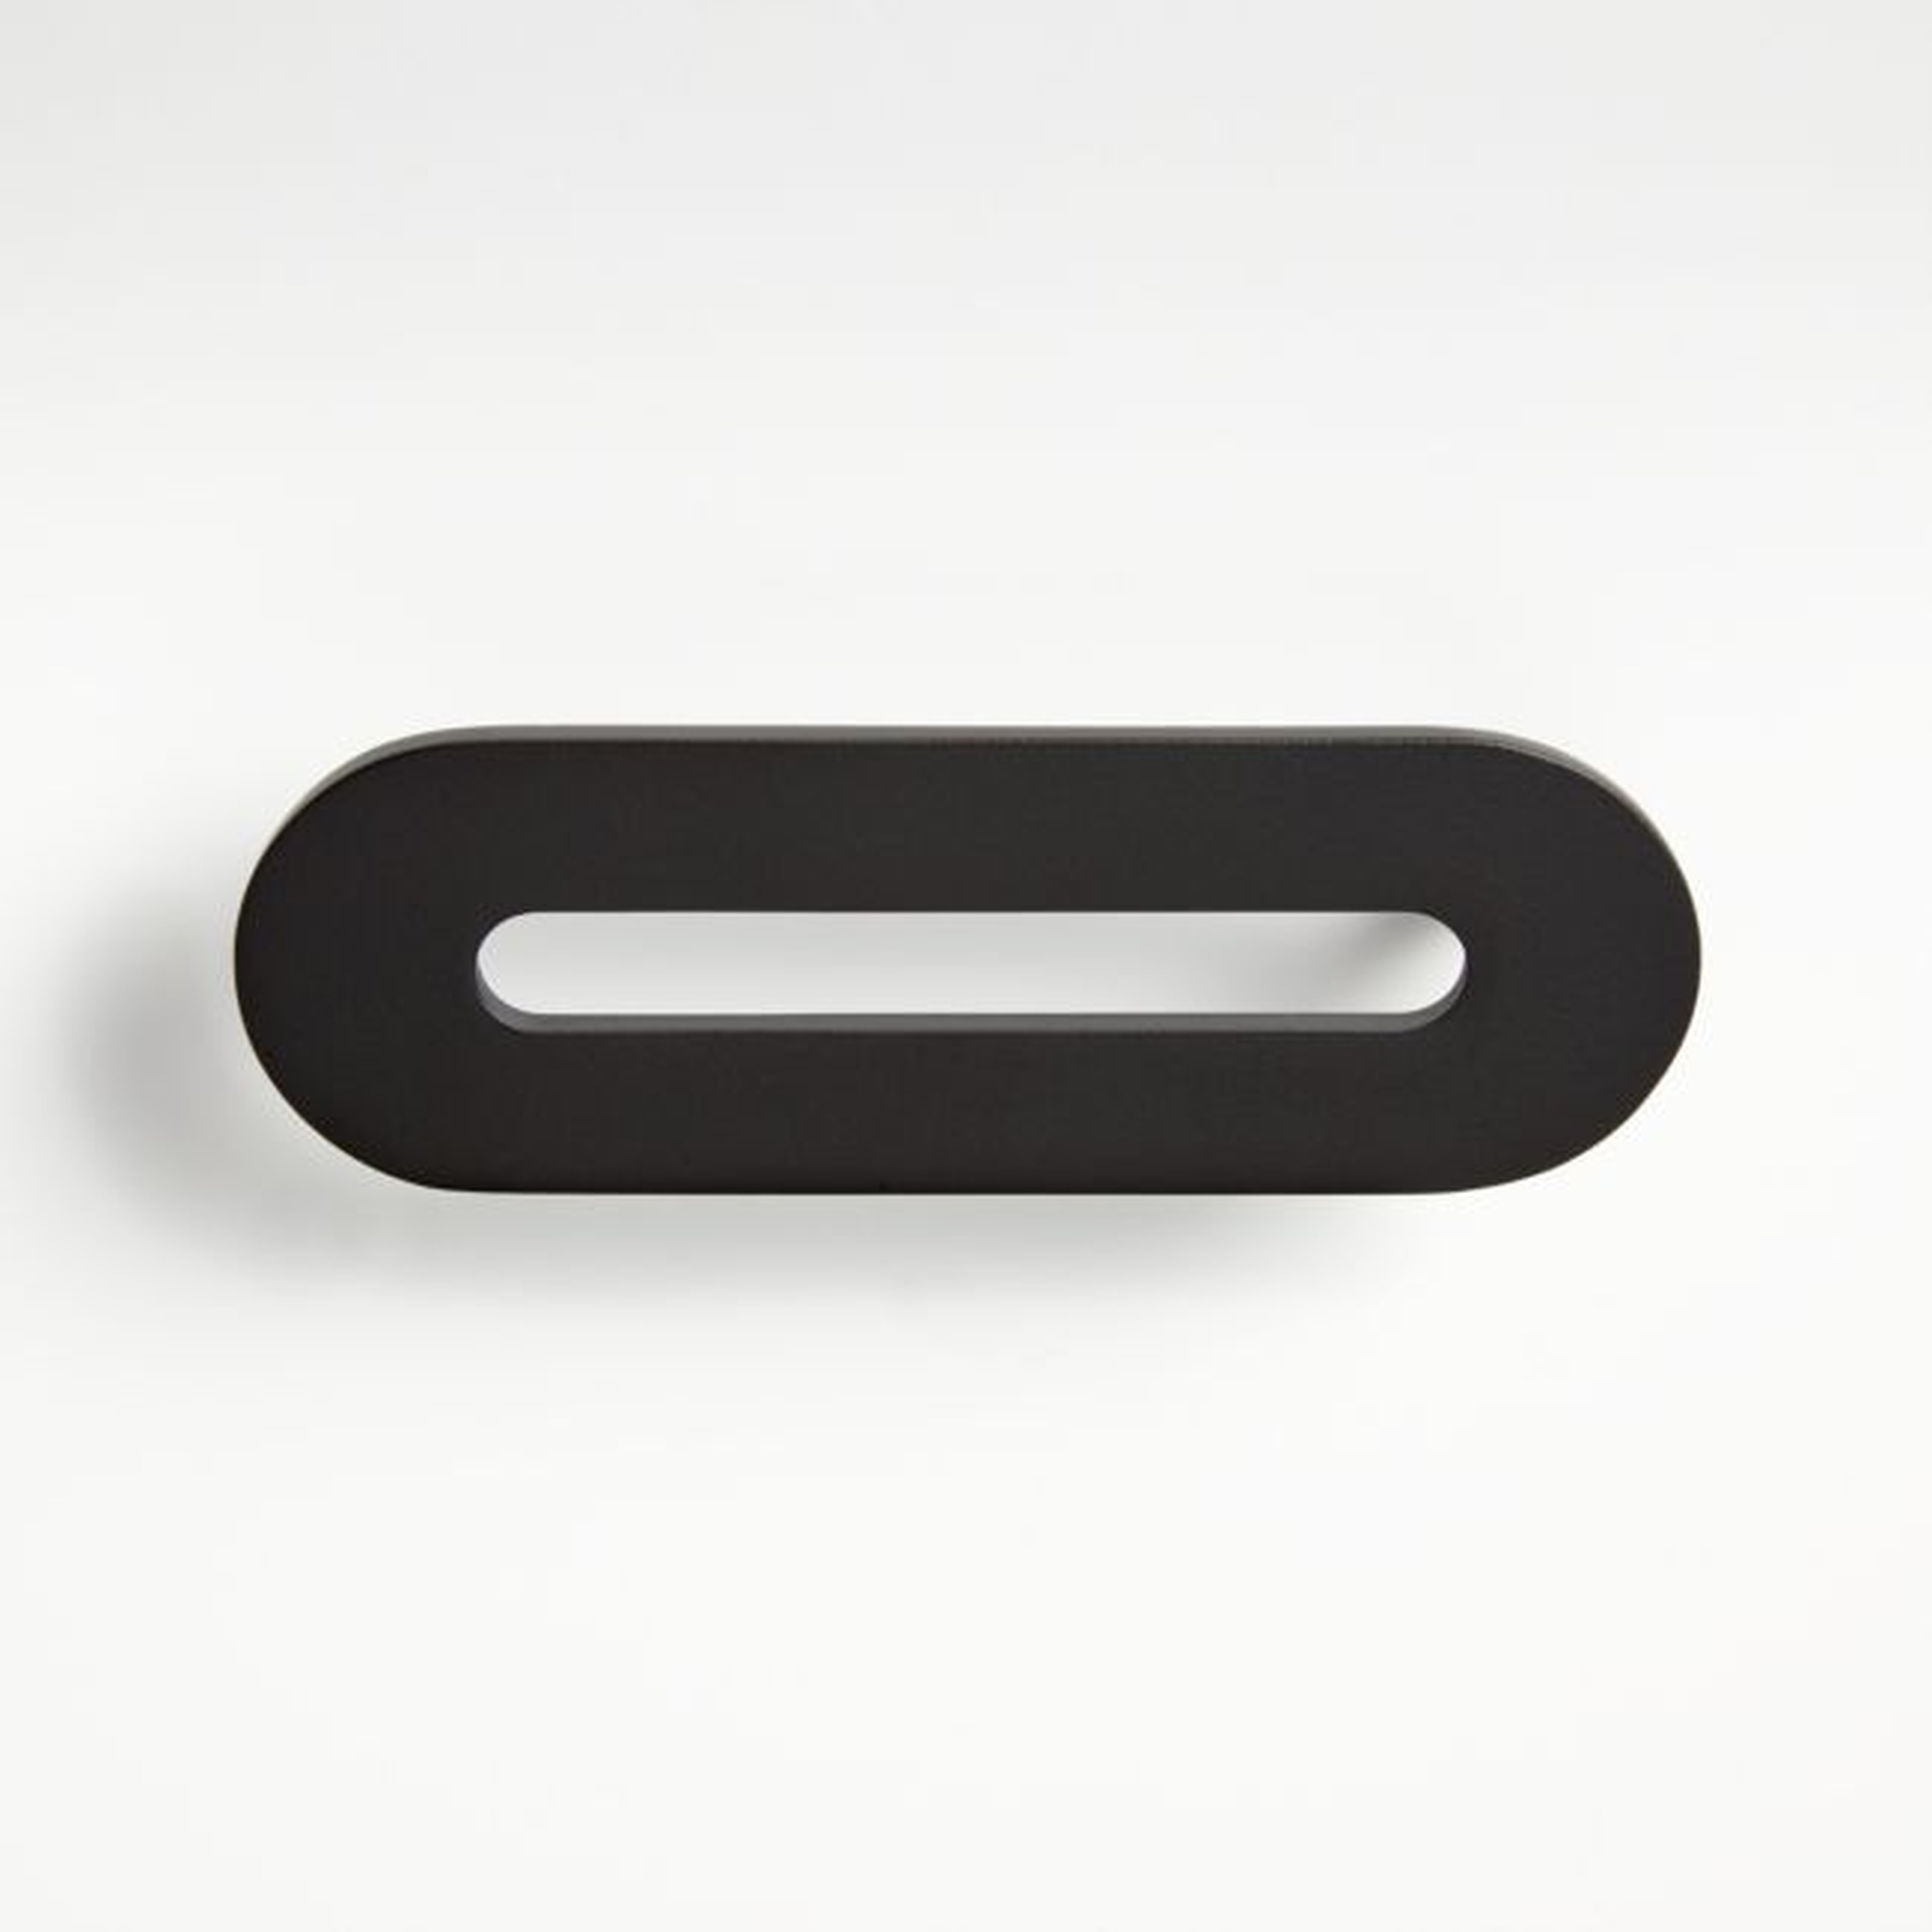 Ronna Matte Black 3" Open Drawer Pull - Crate and Barrel